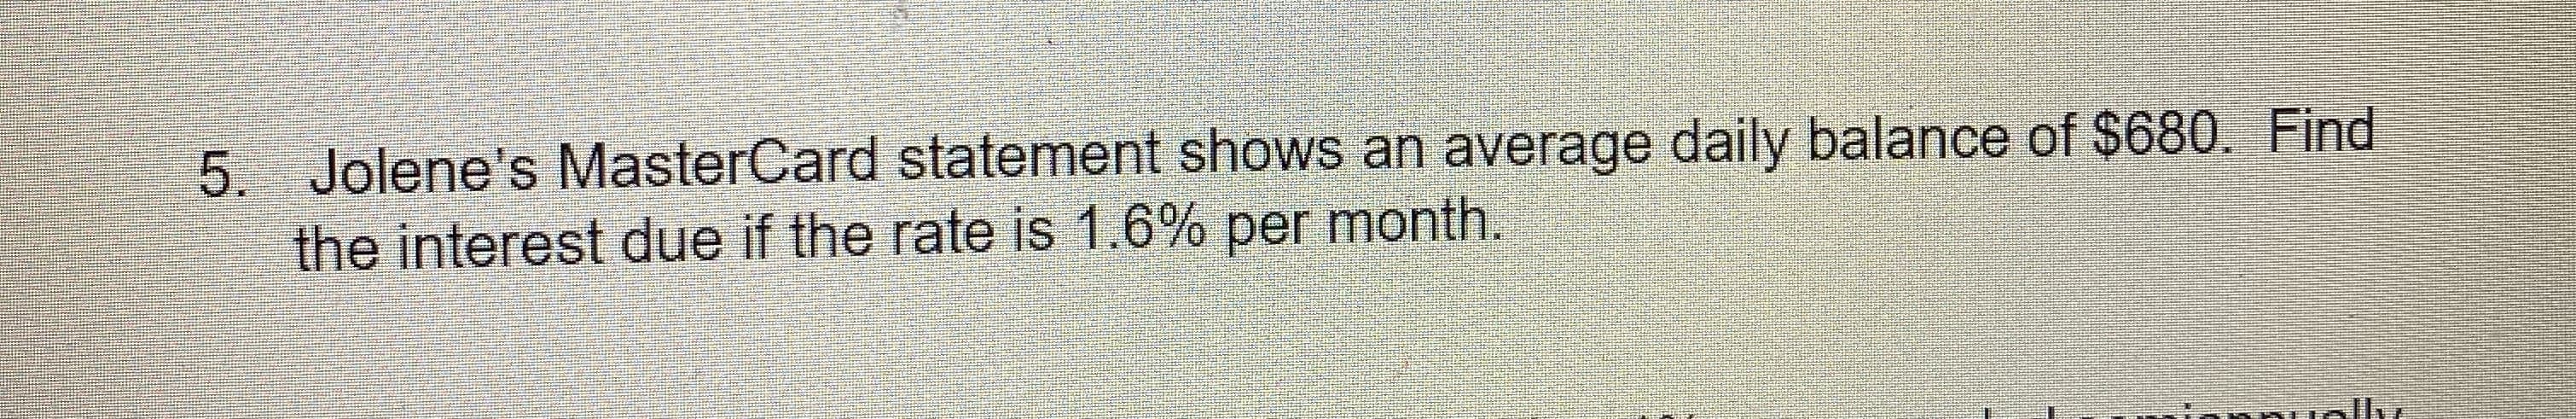 Jolene's MasterCard statement shows an average daily balance of $680. Find
the interest due if the rate is 1.6% per month.
